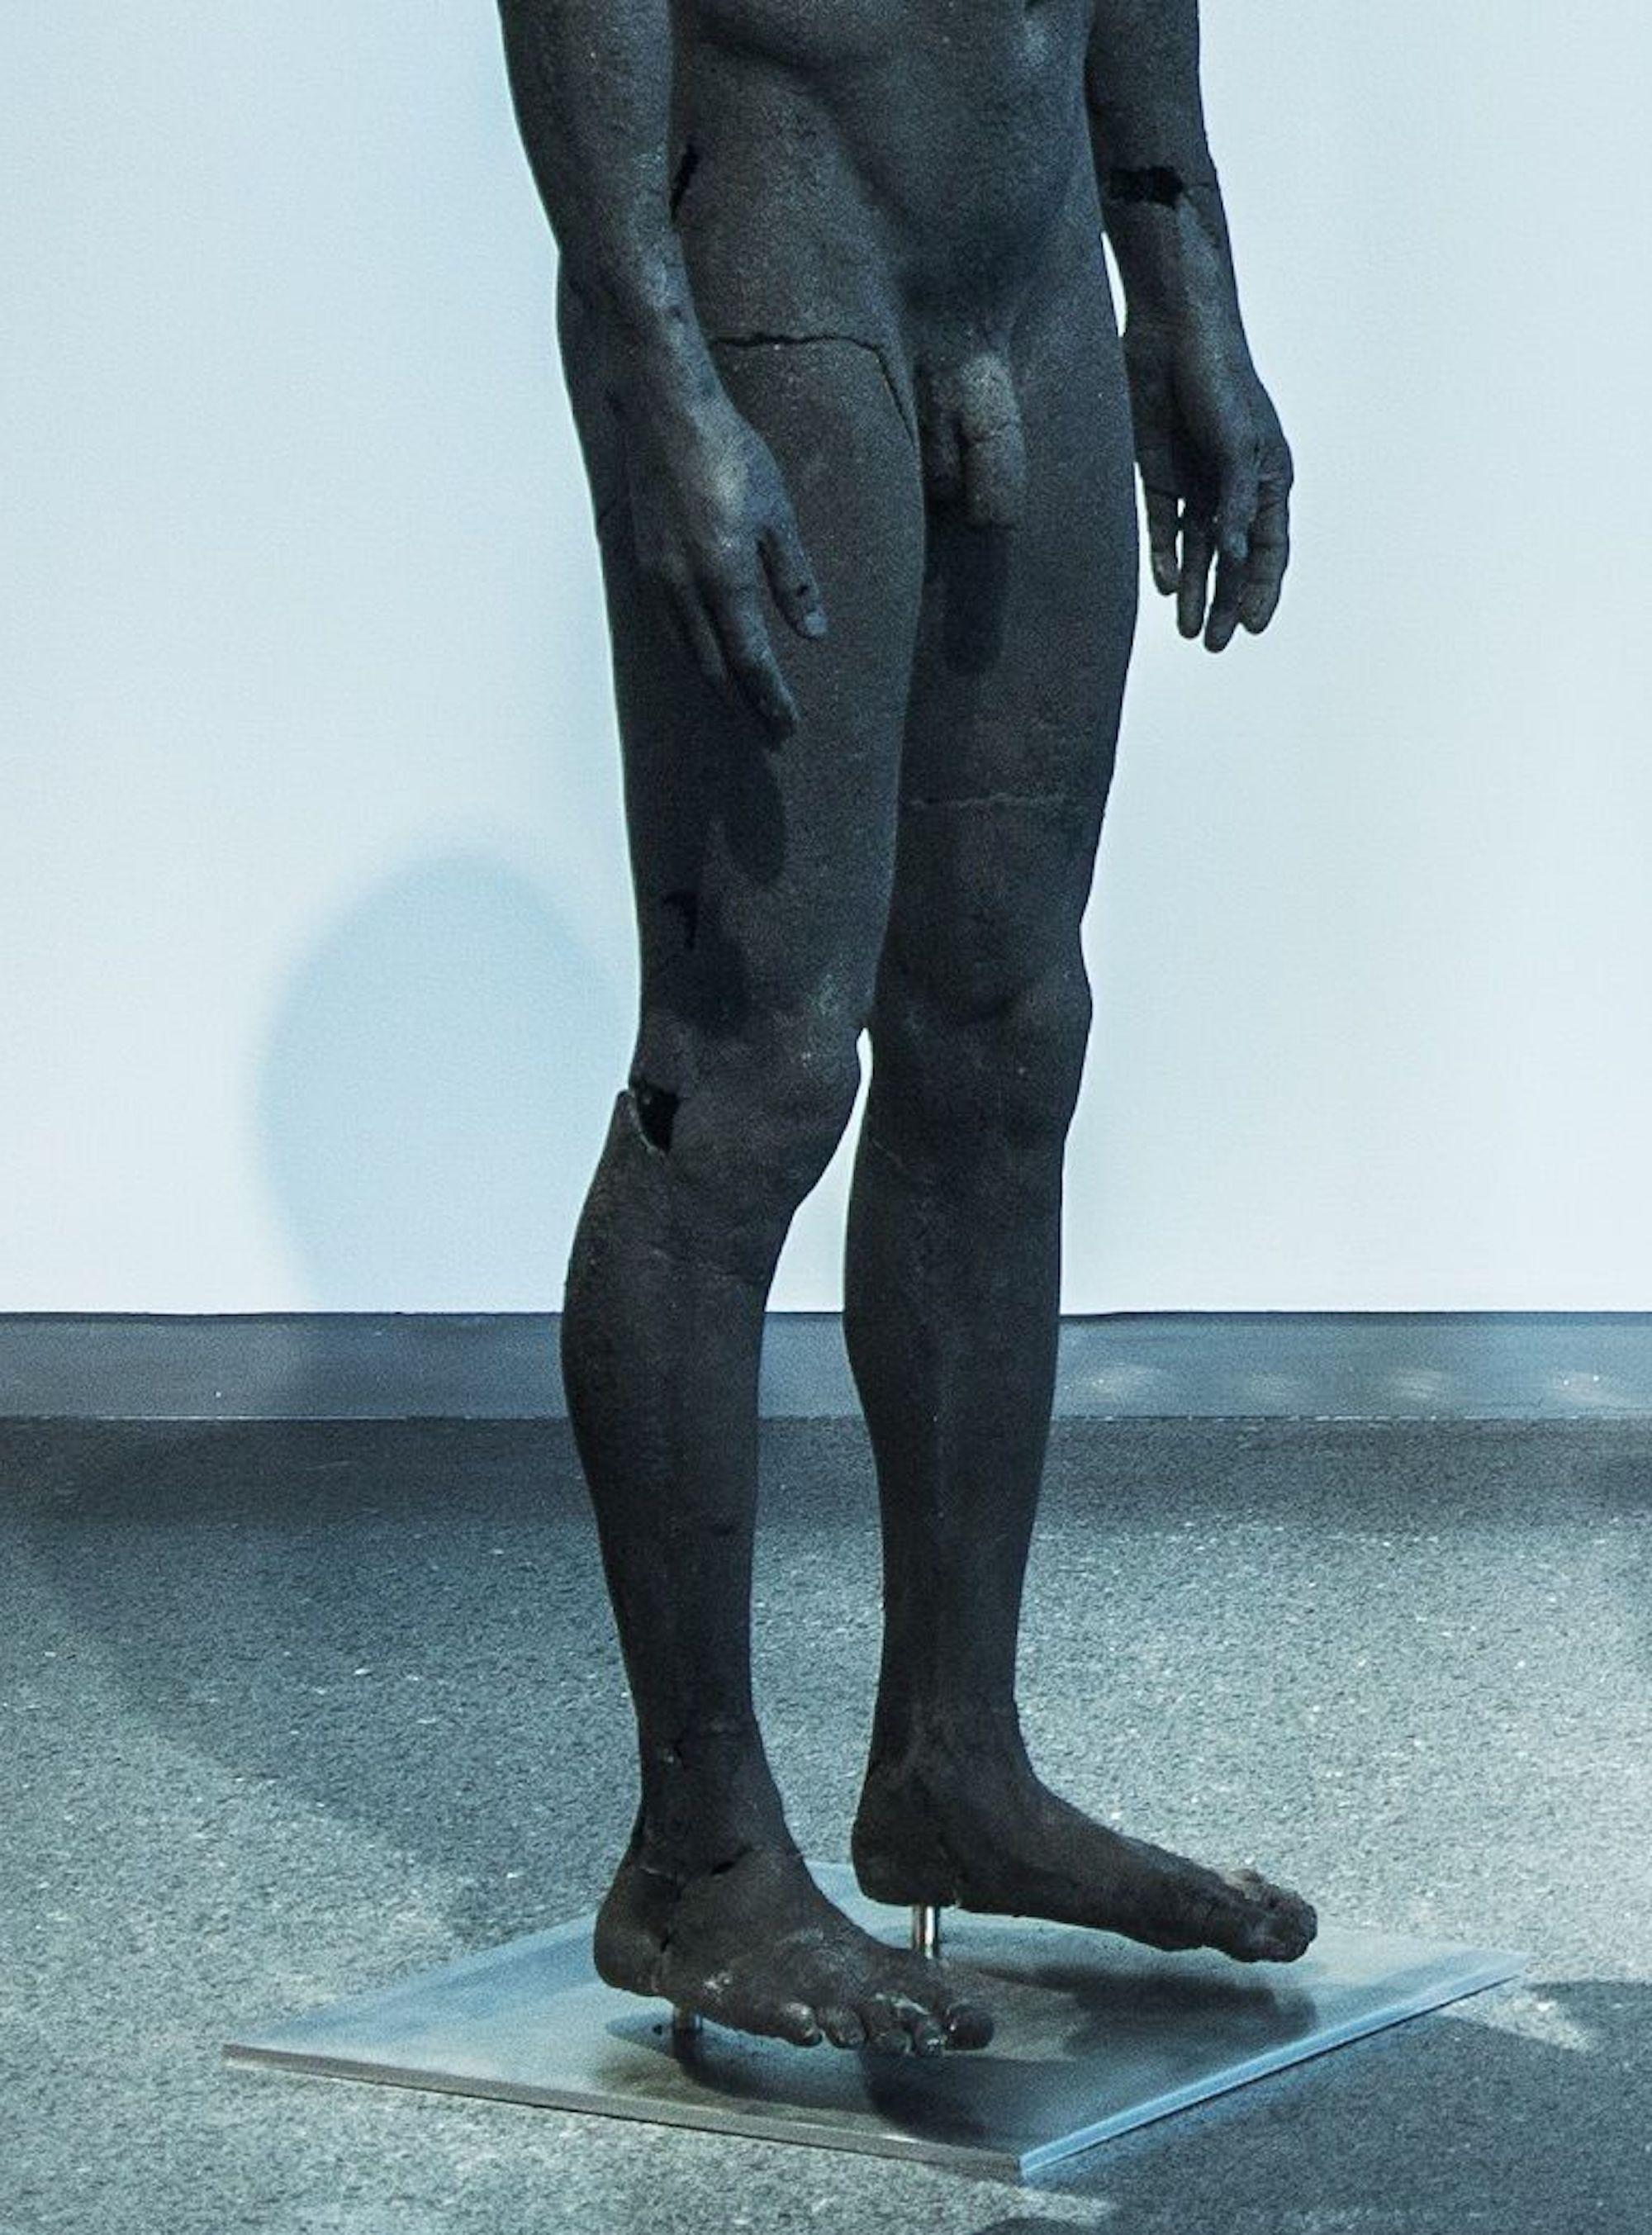 The Presence of Absence - Male (I) by Tom Price - Sculpture en charbon, corps nu en vente 4